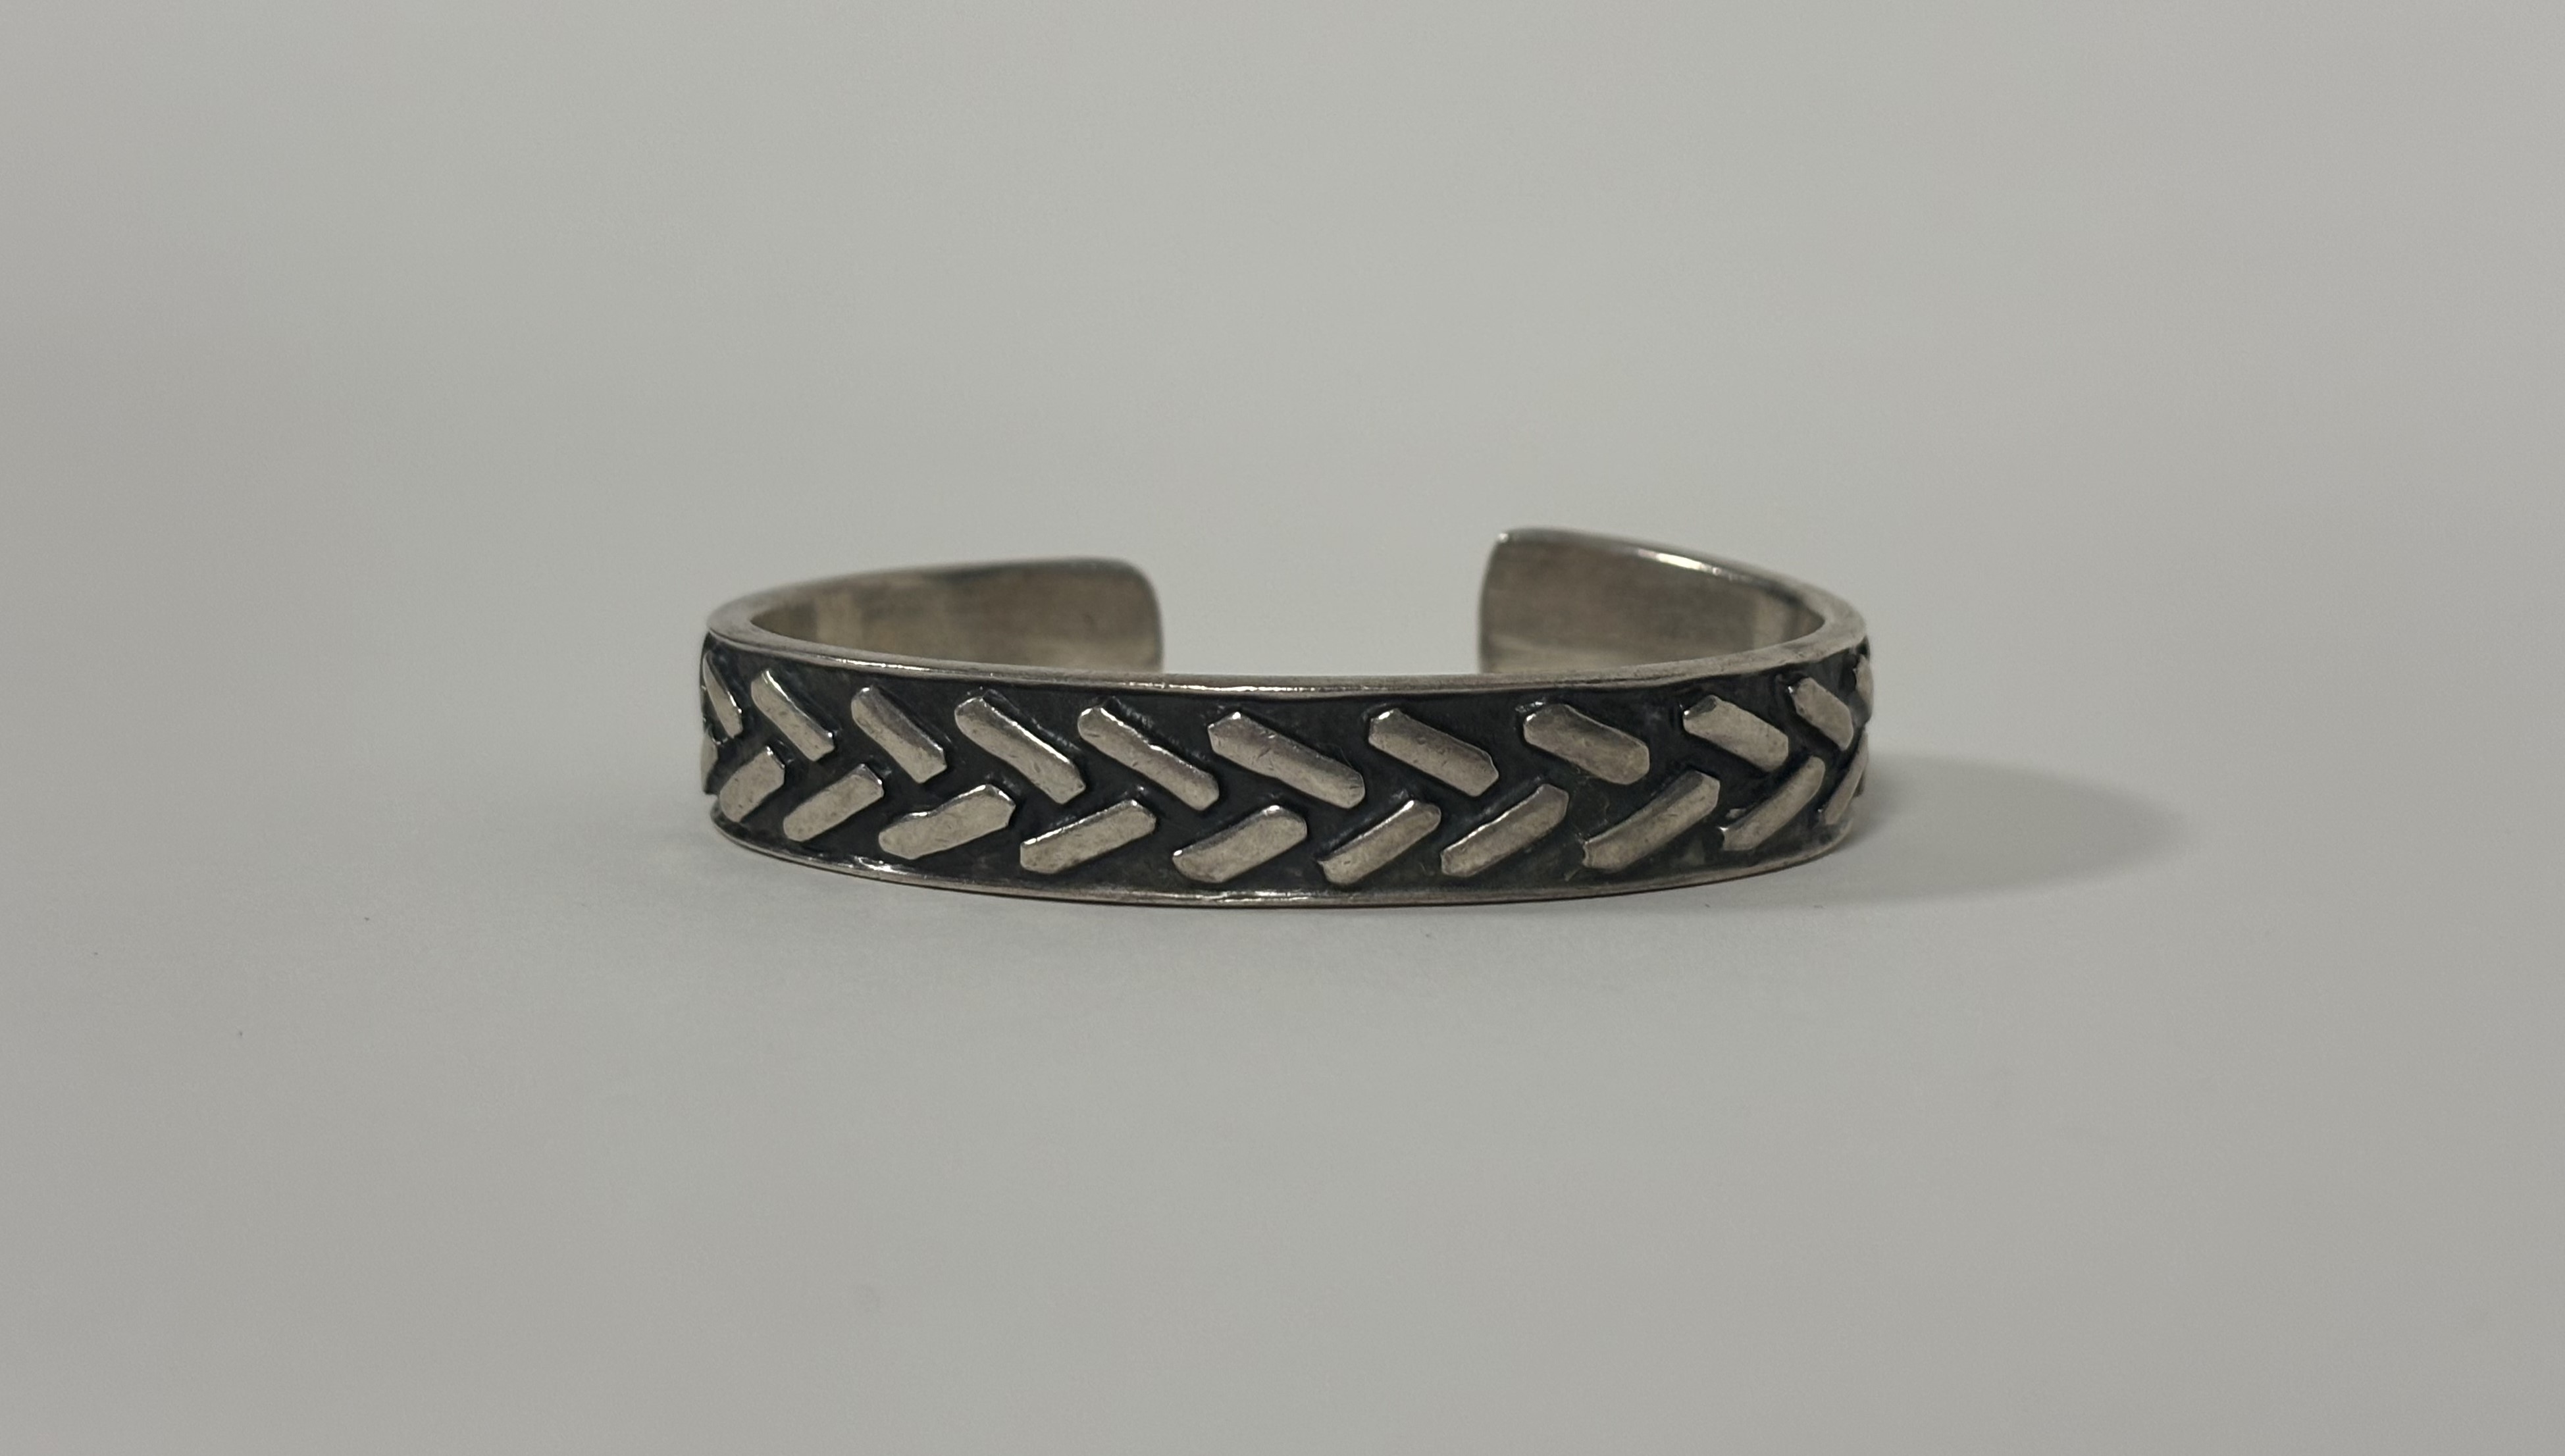 Patrick Mavros, a sterling silver bangle, repousse with a chevron pattern against a blackened